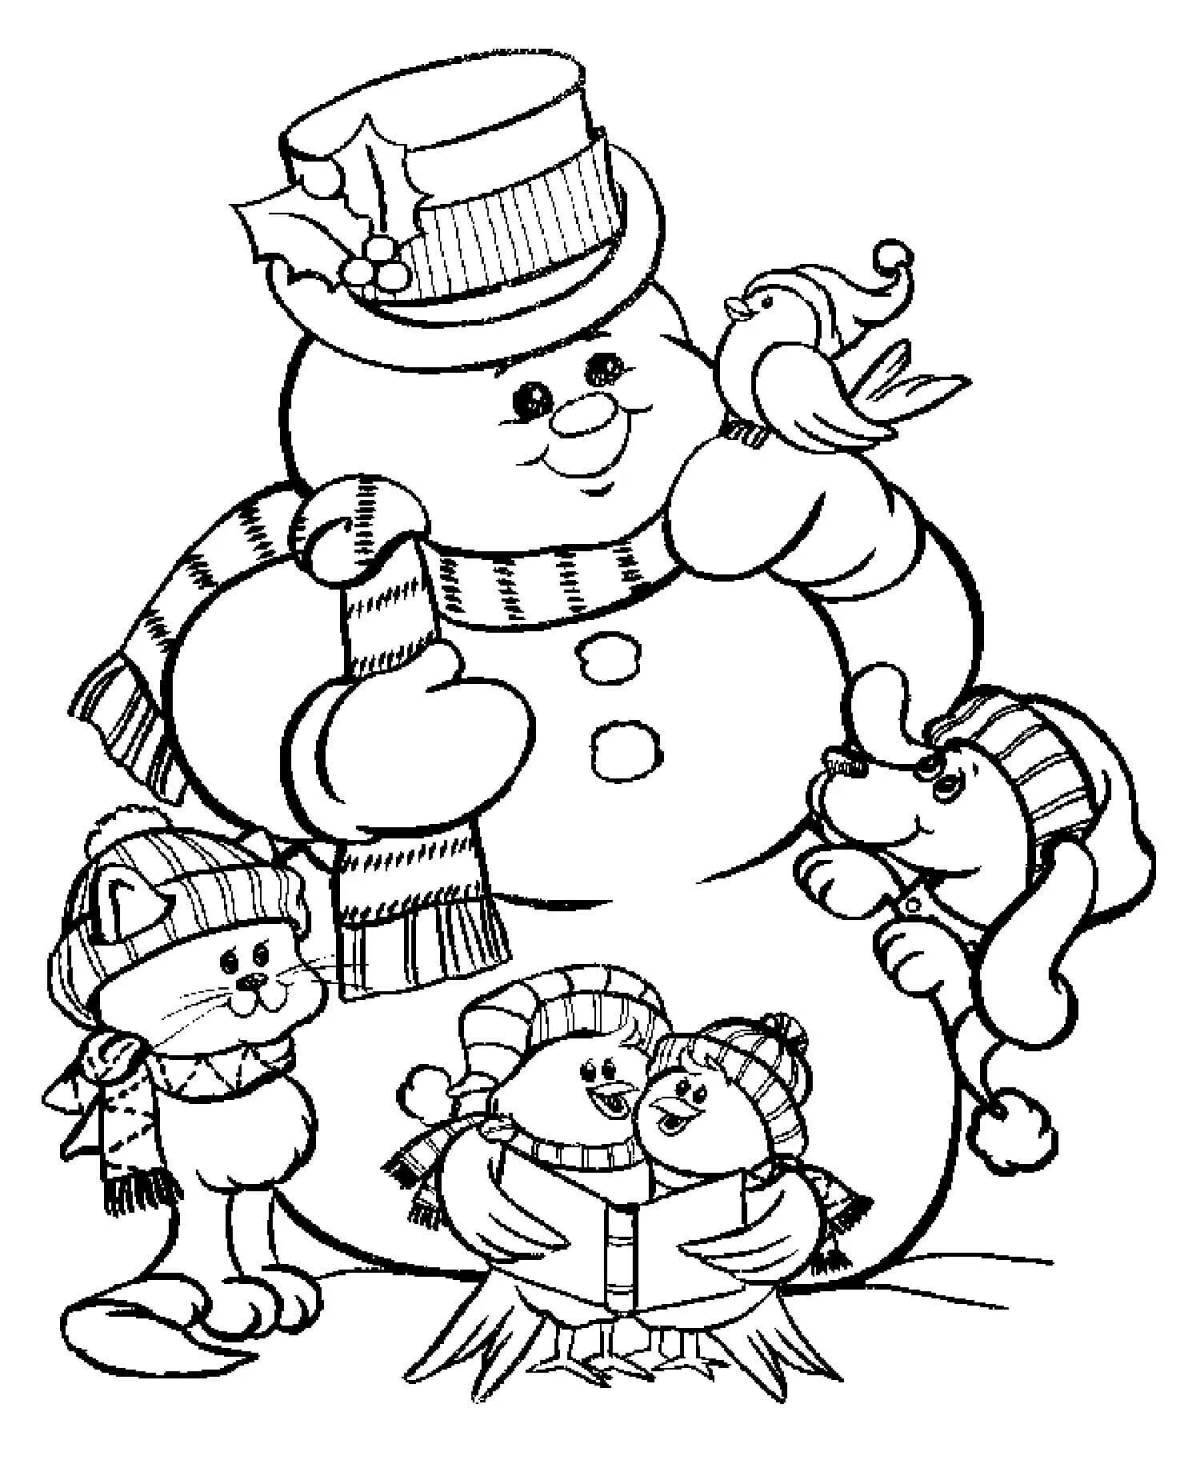 Stormy day snowman coloring book